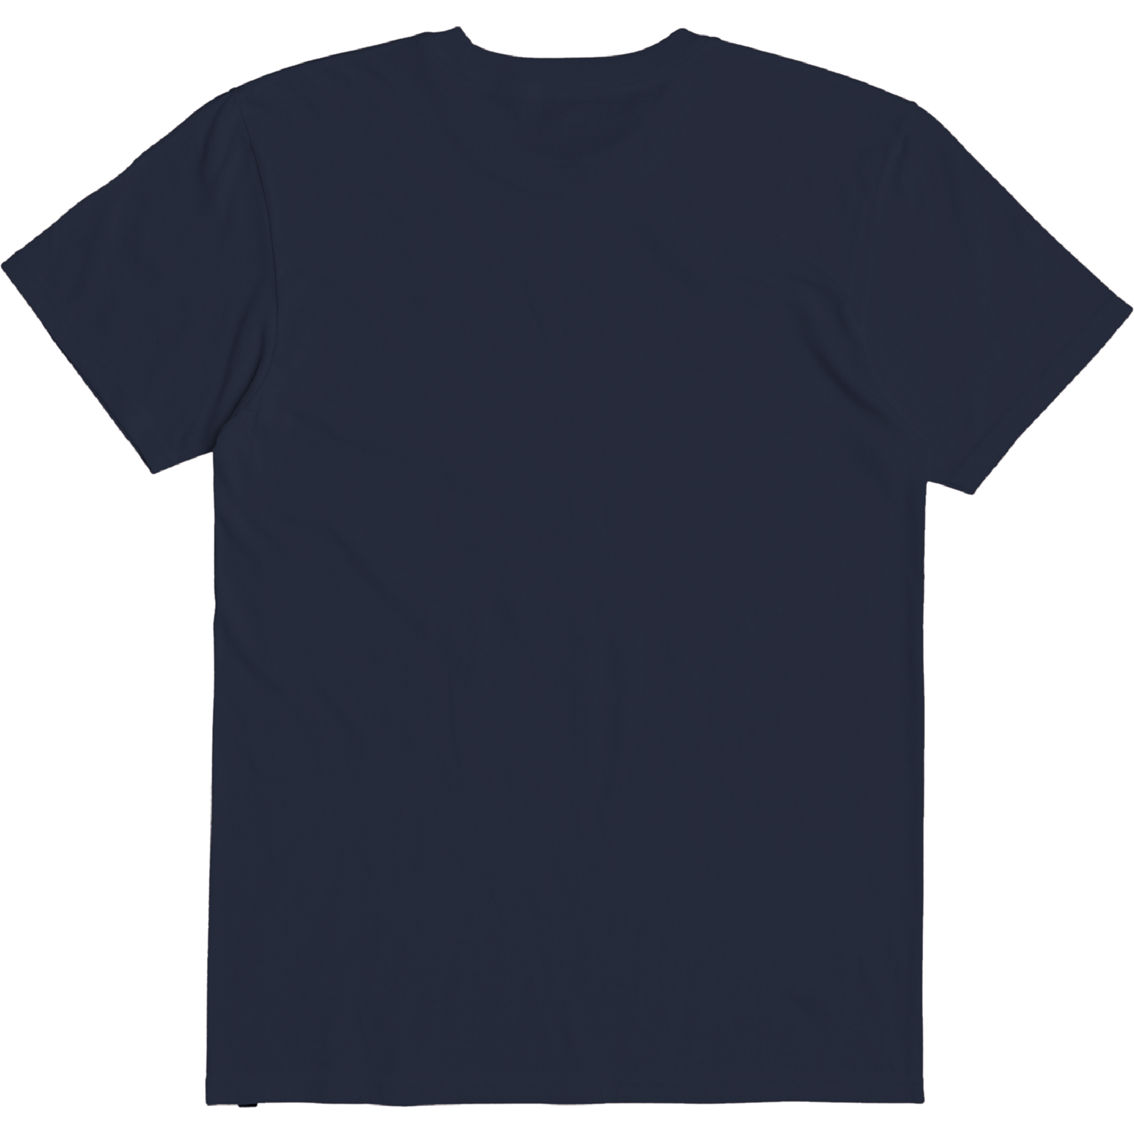 Quiksilver Gradient Lines Tee | Shirts | Clothing & Accessories | Shop ...